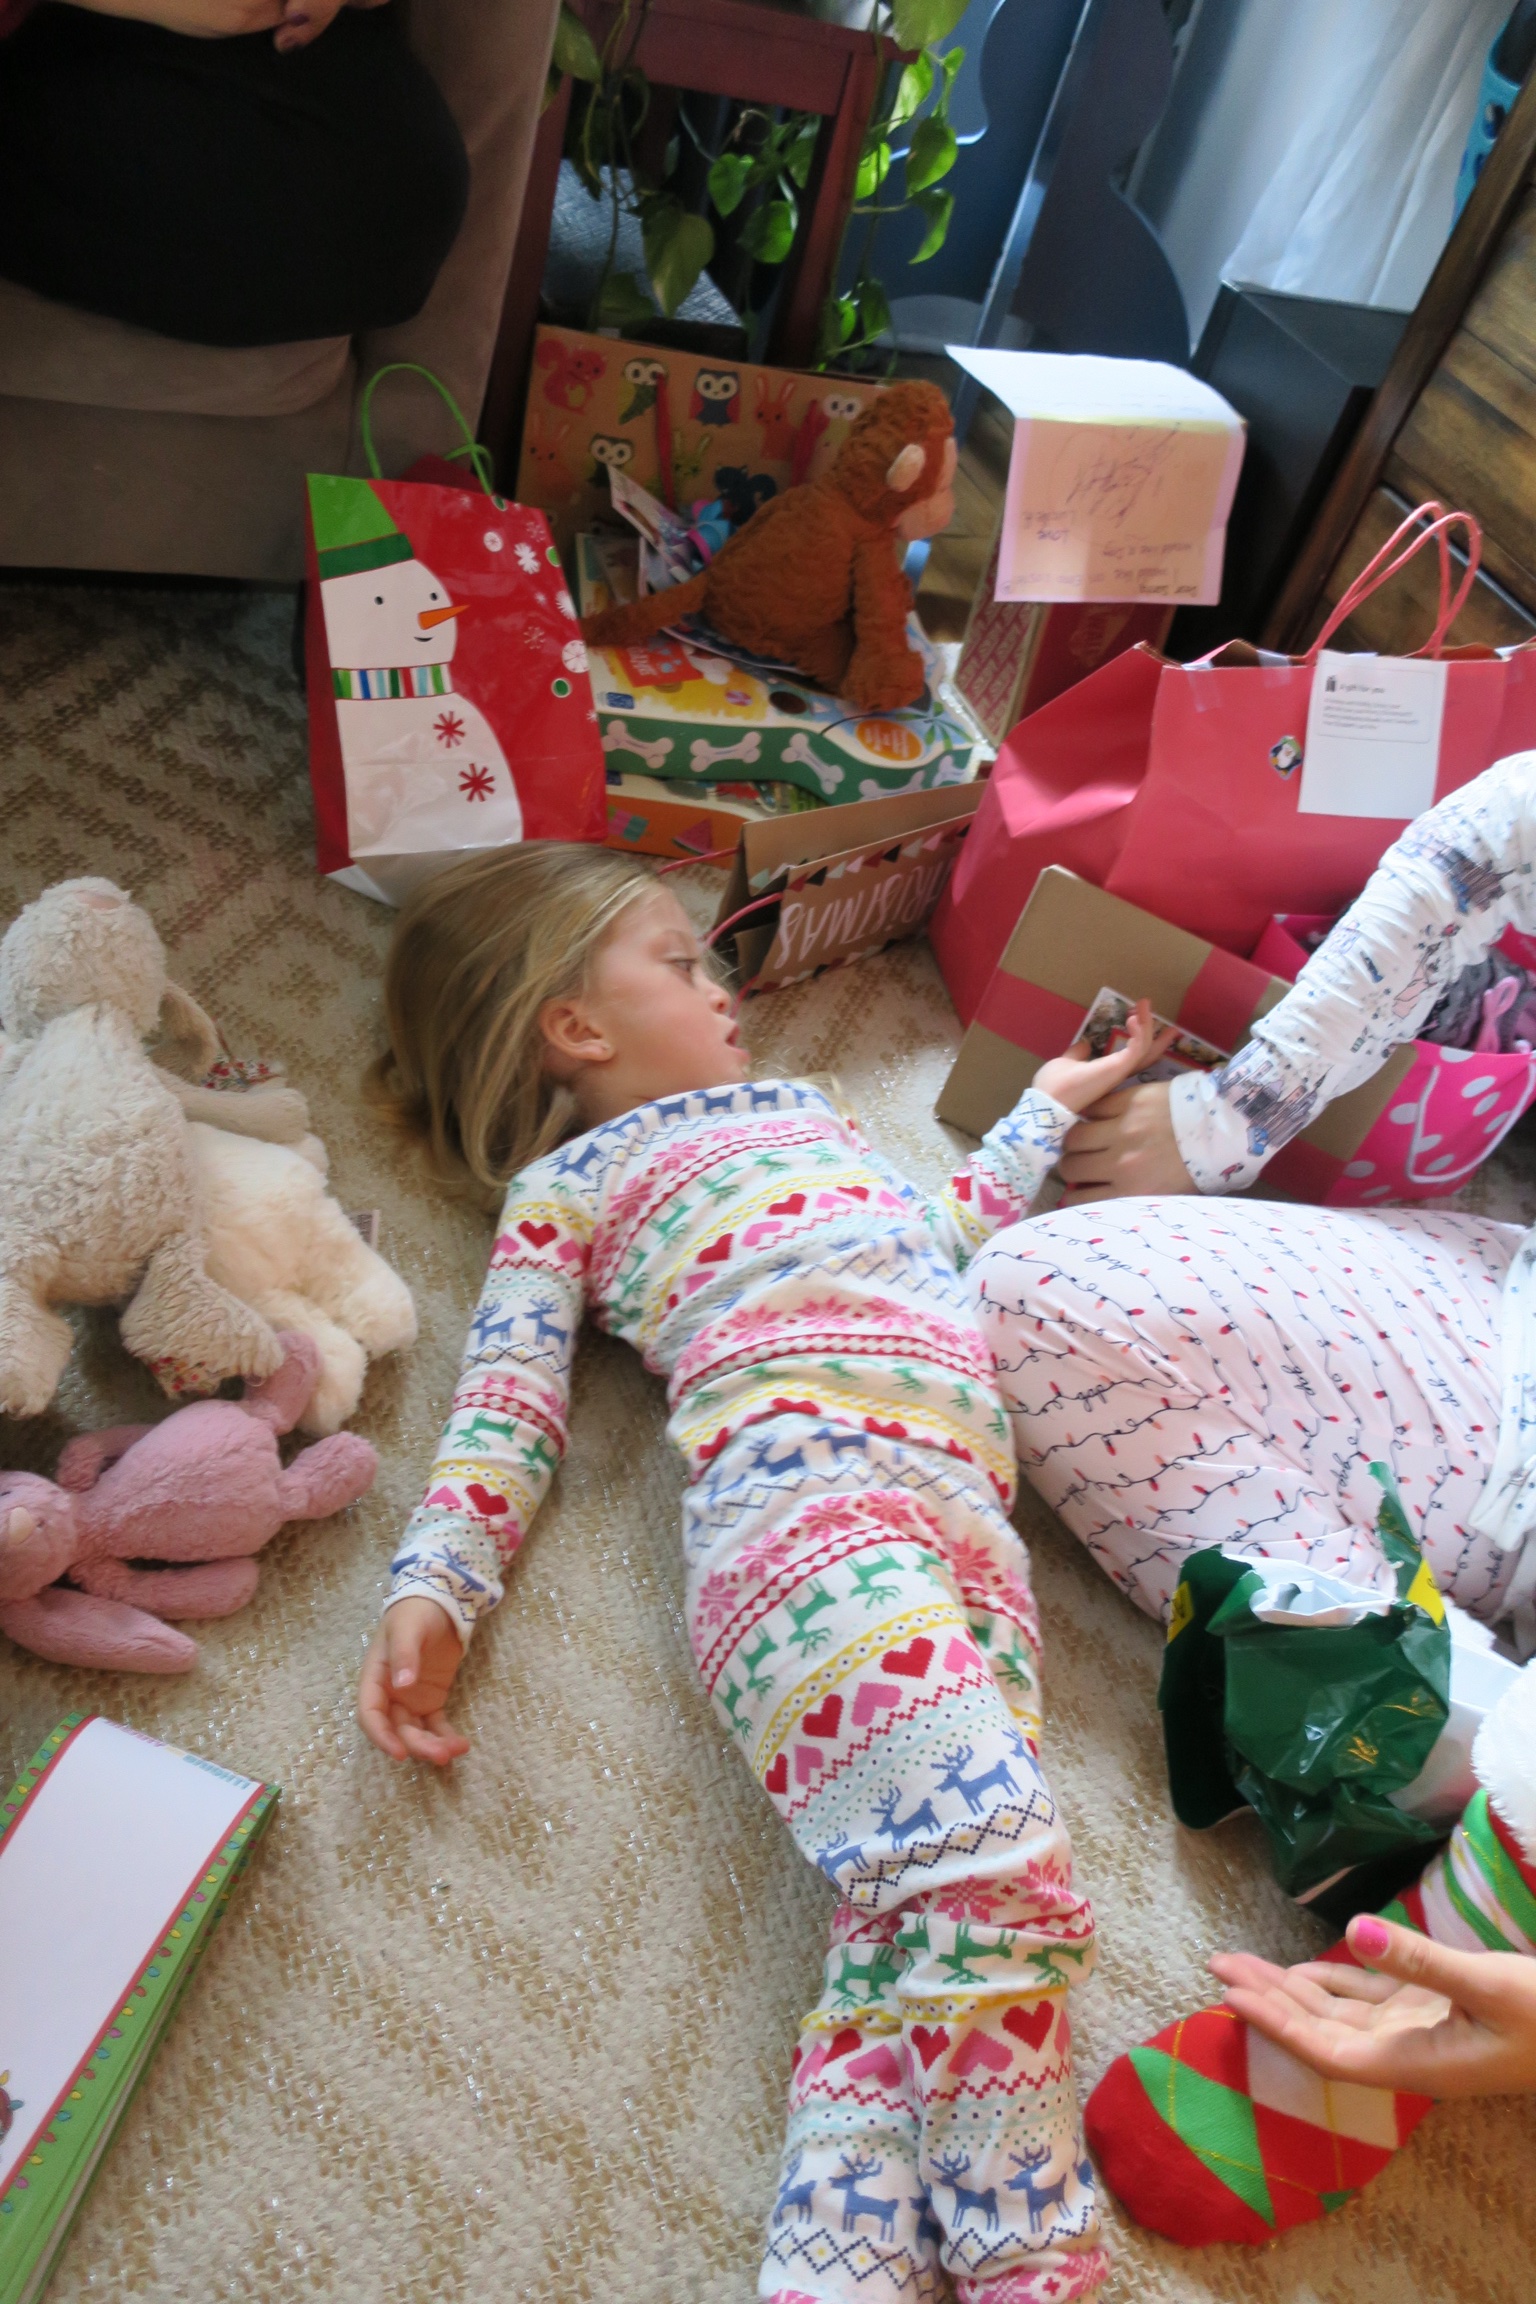  Tantrums can happen at any time, even on Christmas in the middle of opening gifts! 